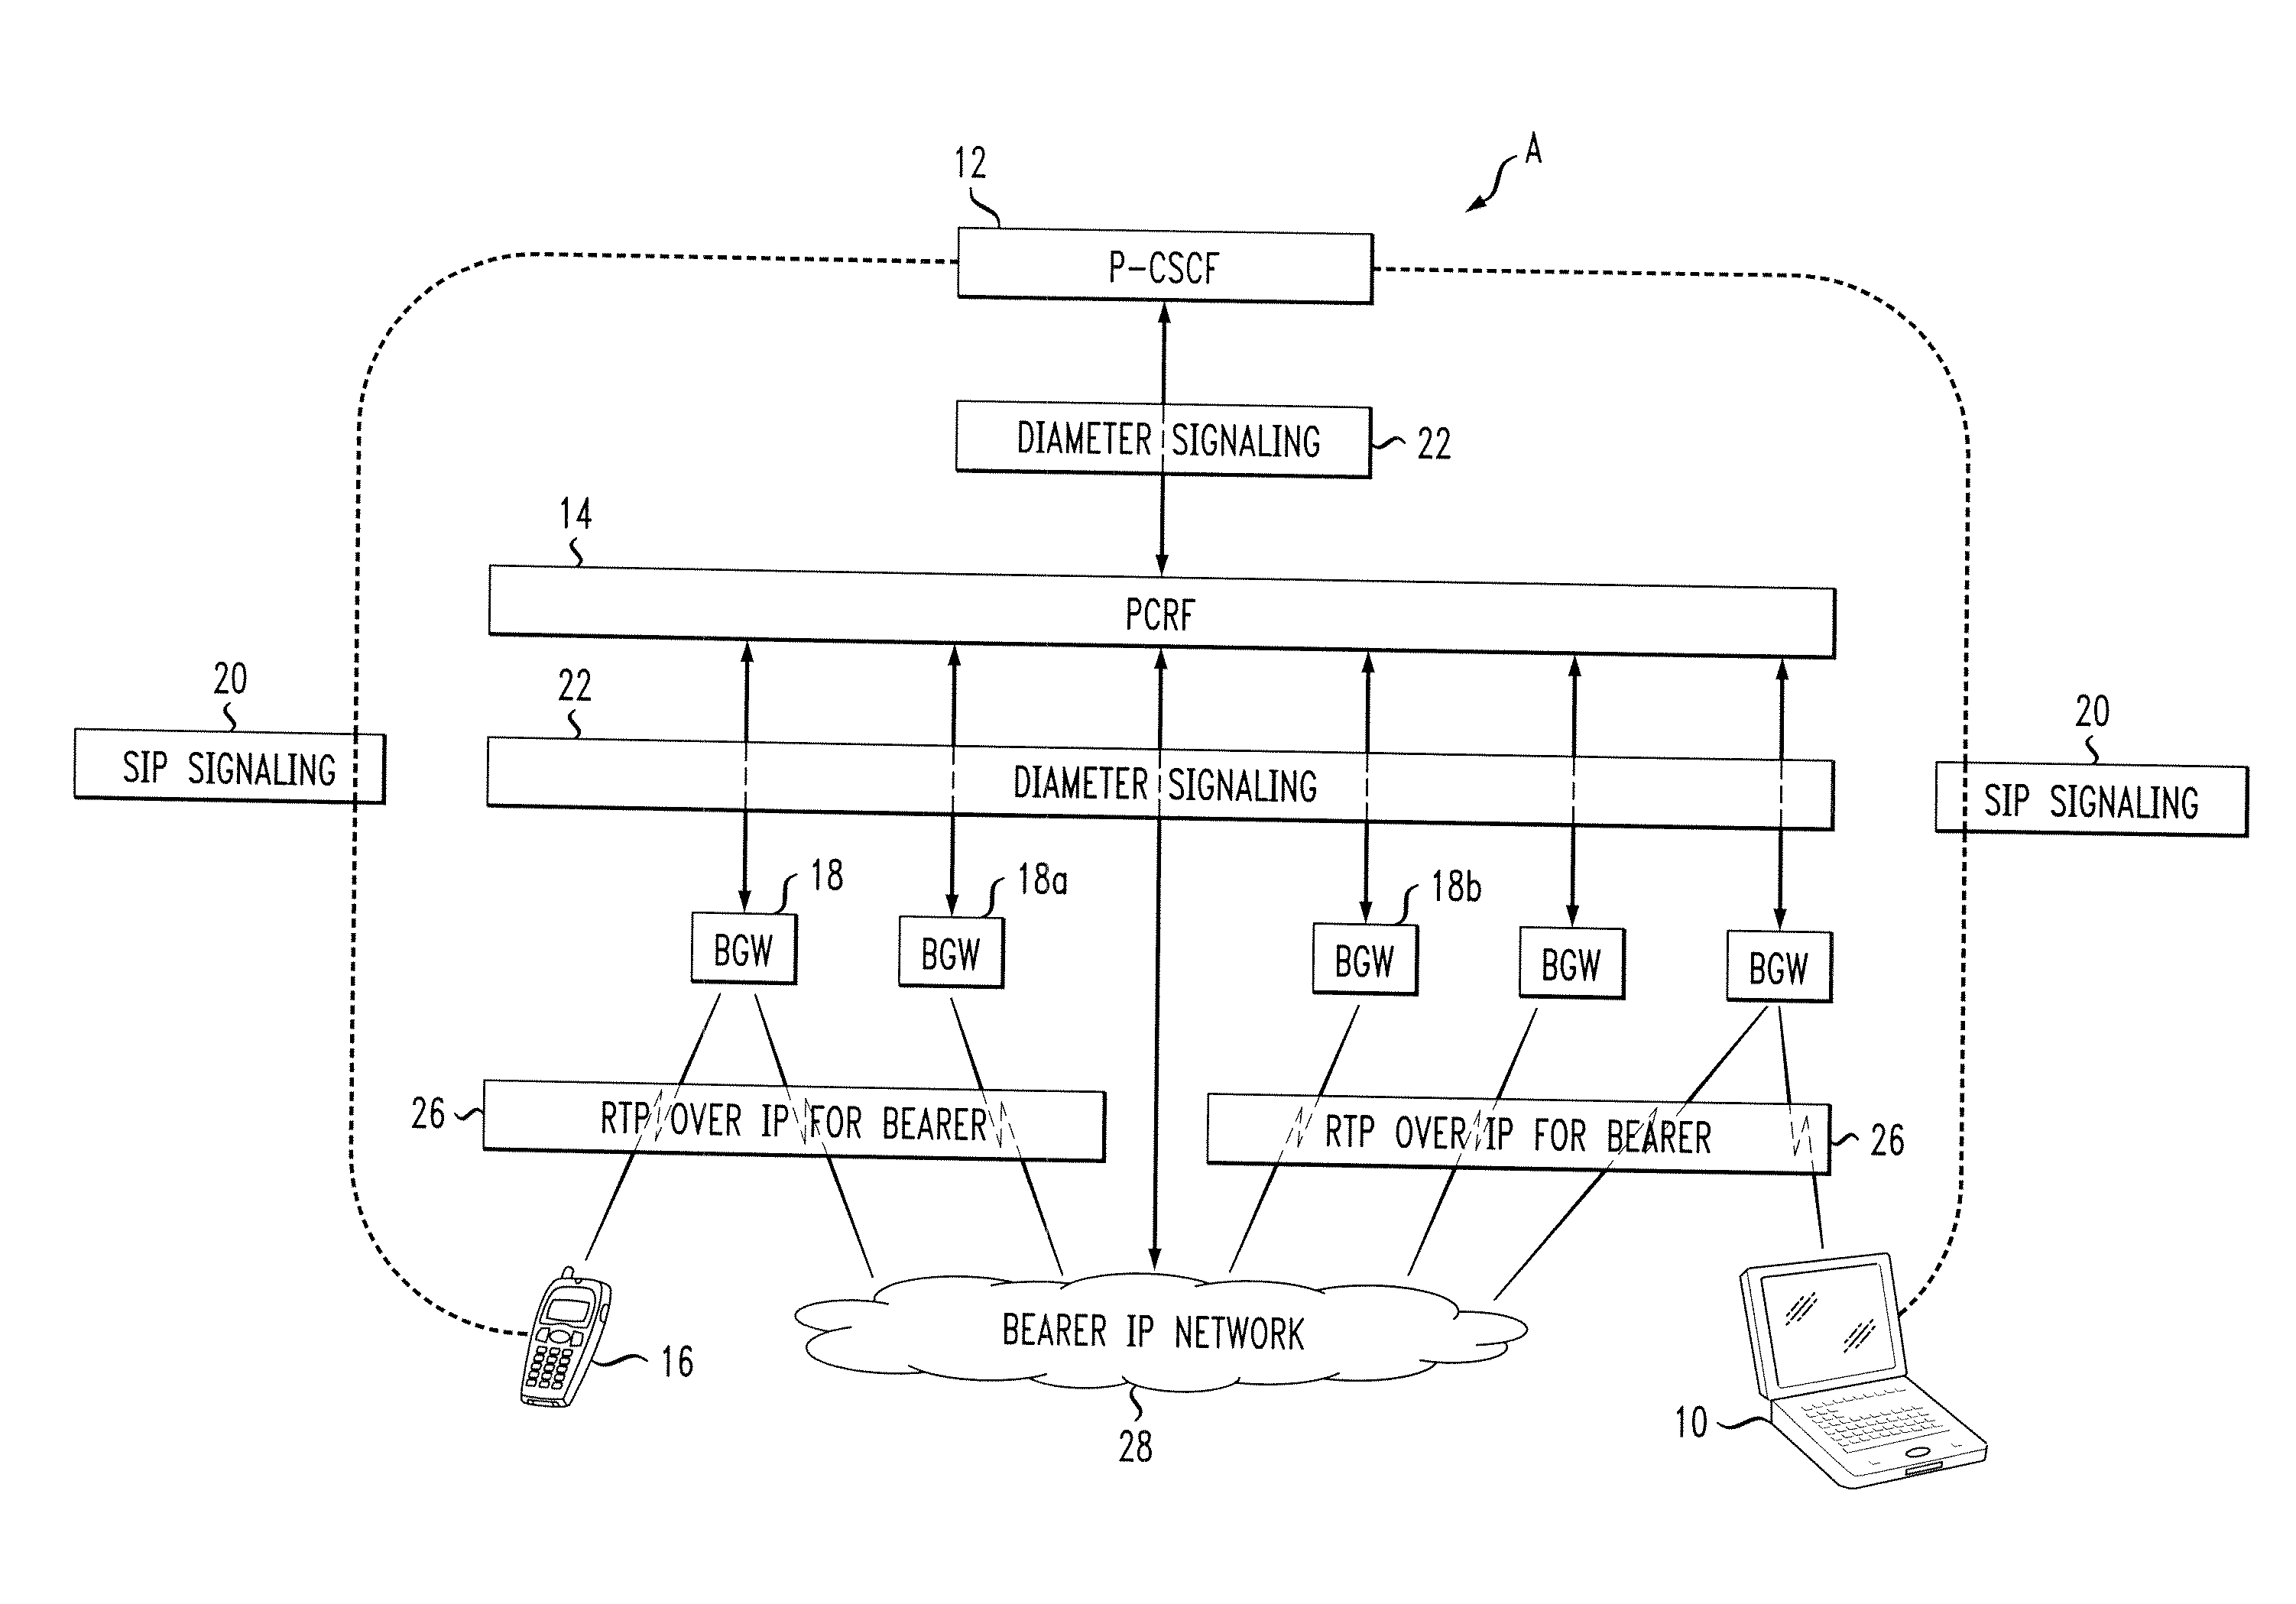 Method and apparatus for overload control and audit in a resource control and management system